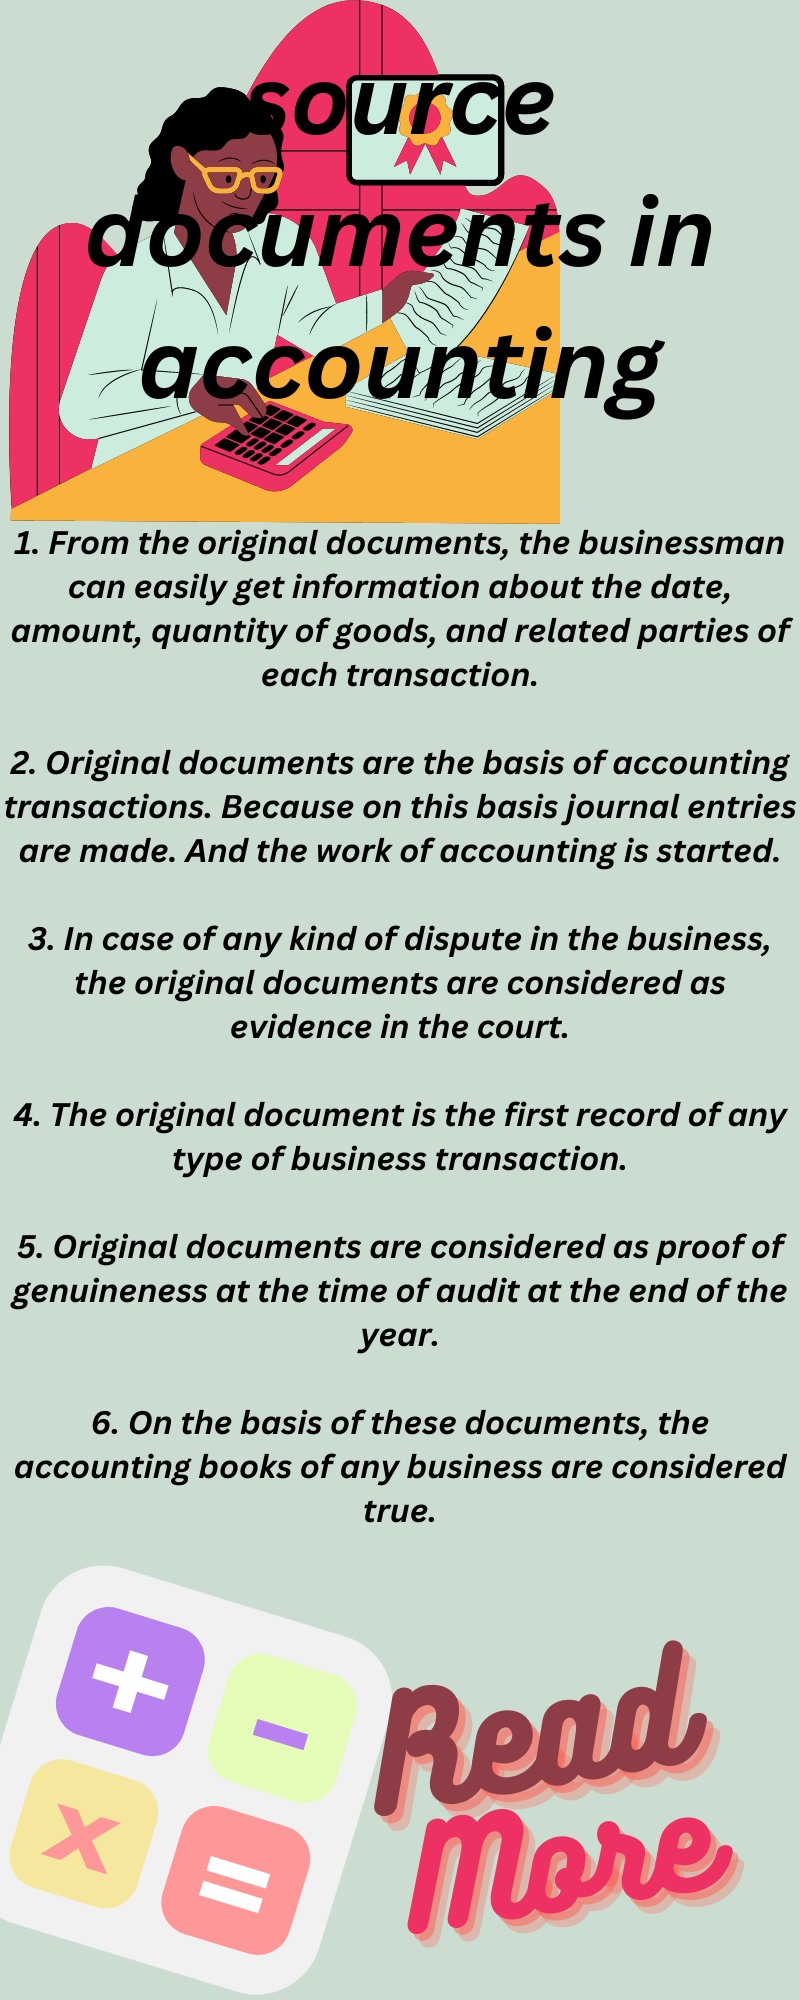 source documents in accounting